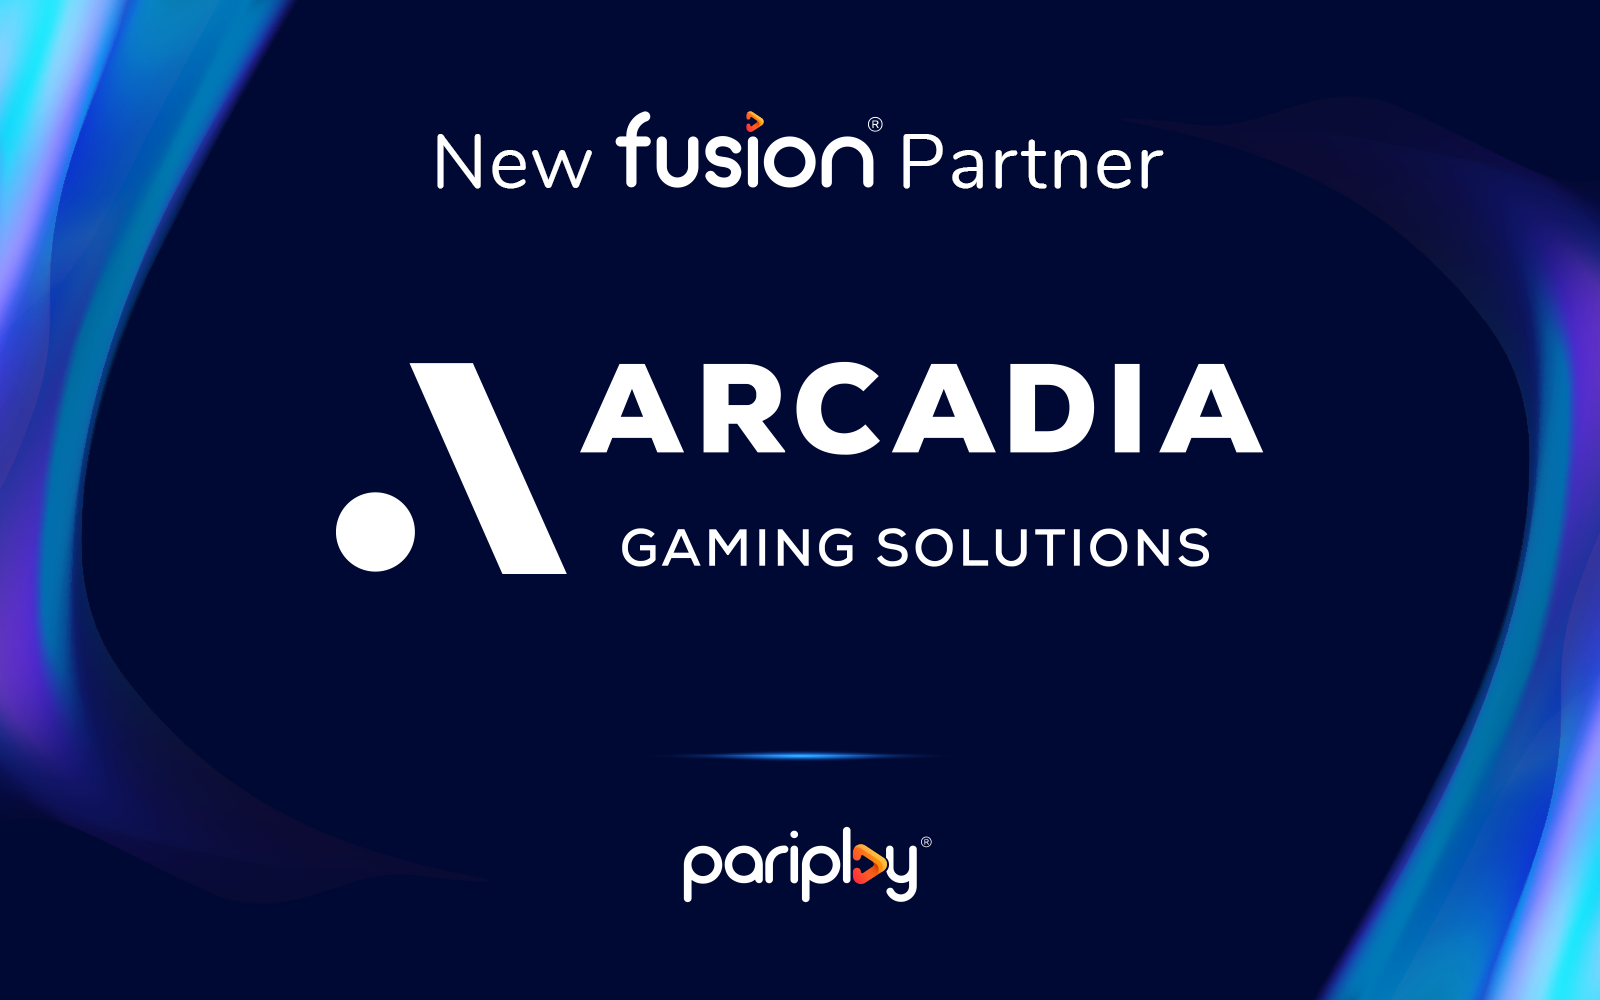 Pariplay’s leading platform, which has over 13,000 games, enriched with unique live content after partnering with Arcadia Gaming Solutions.